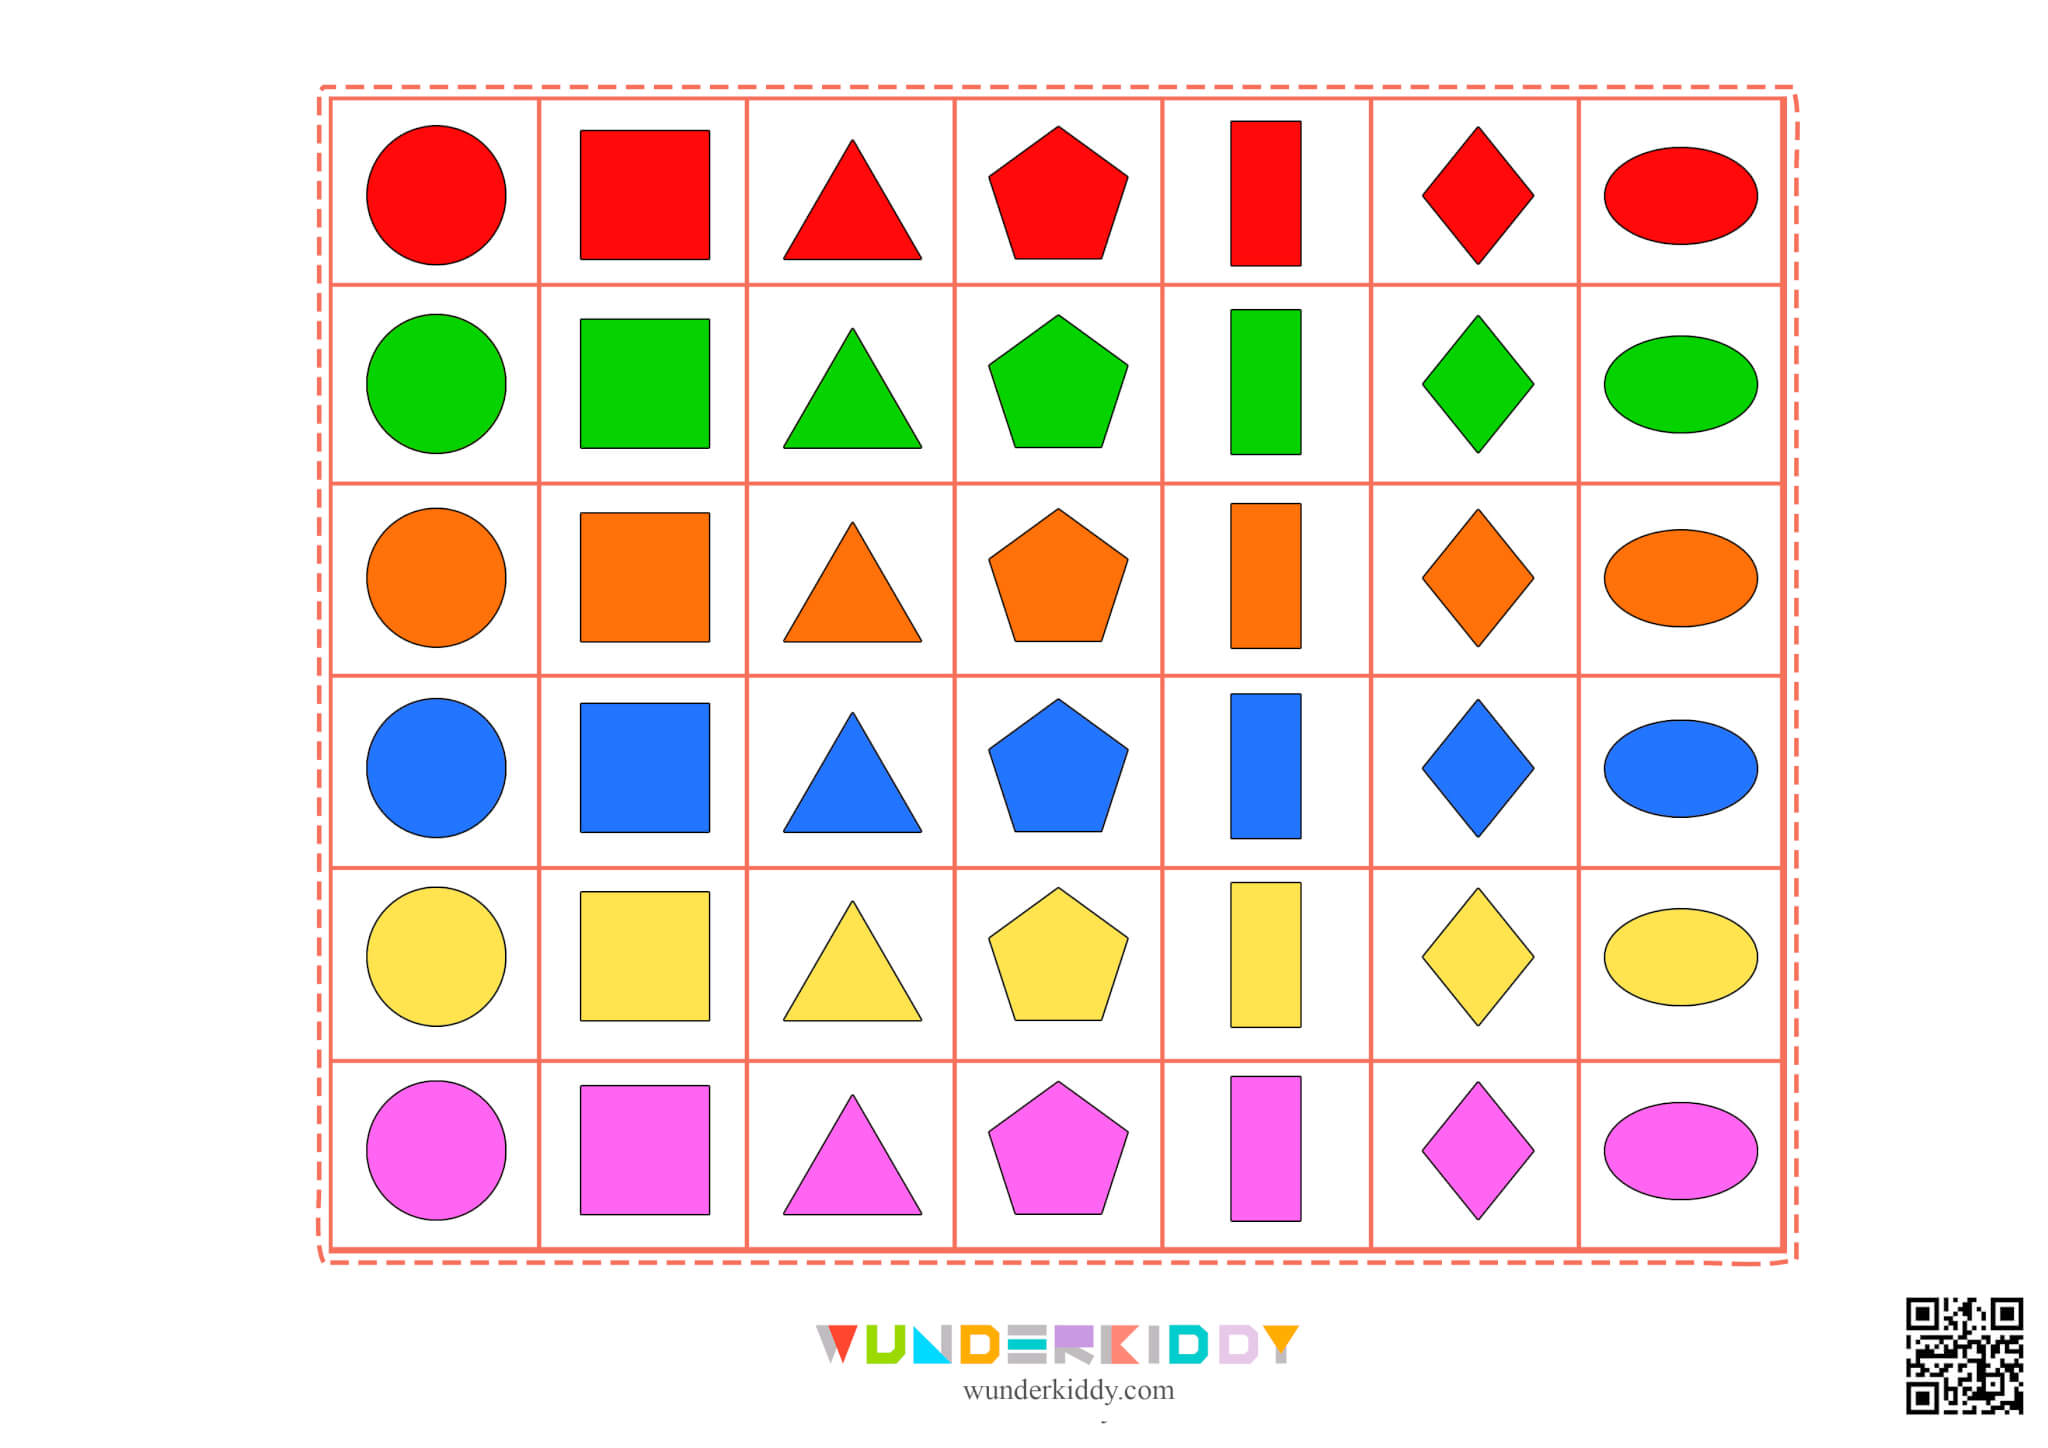 Logic Tables to Learn Shapes and Colors in Kindergarten - Image 3